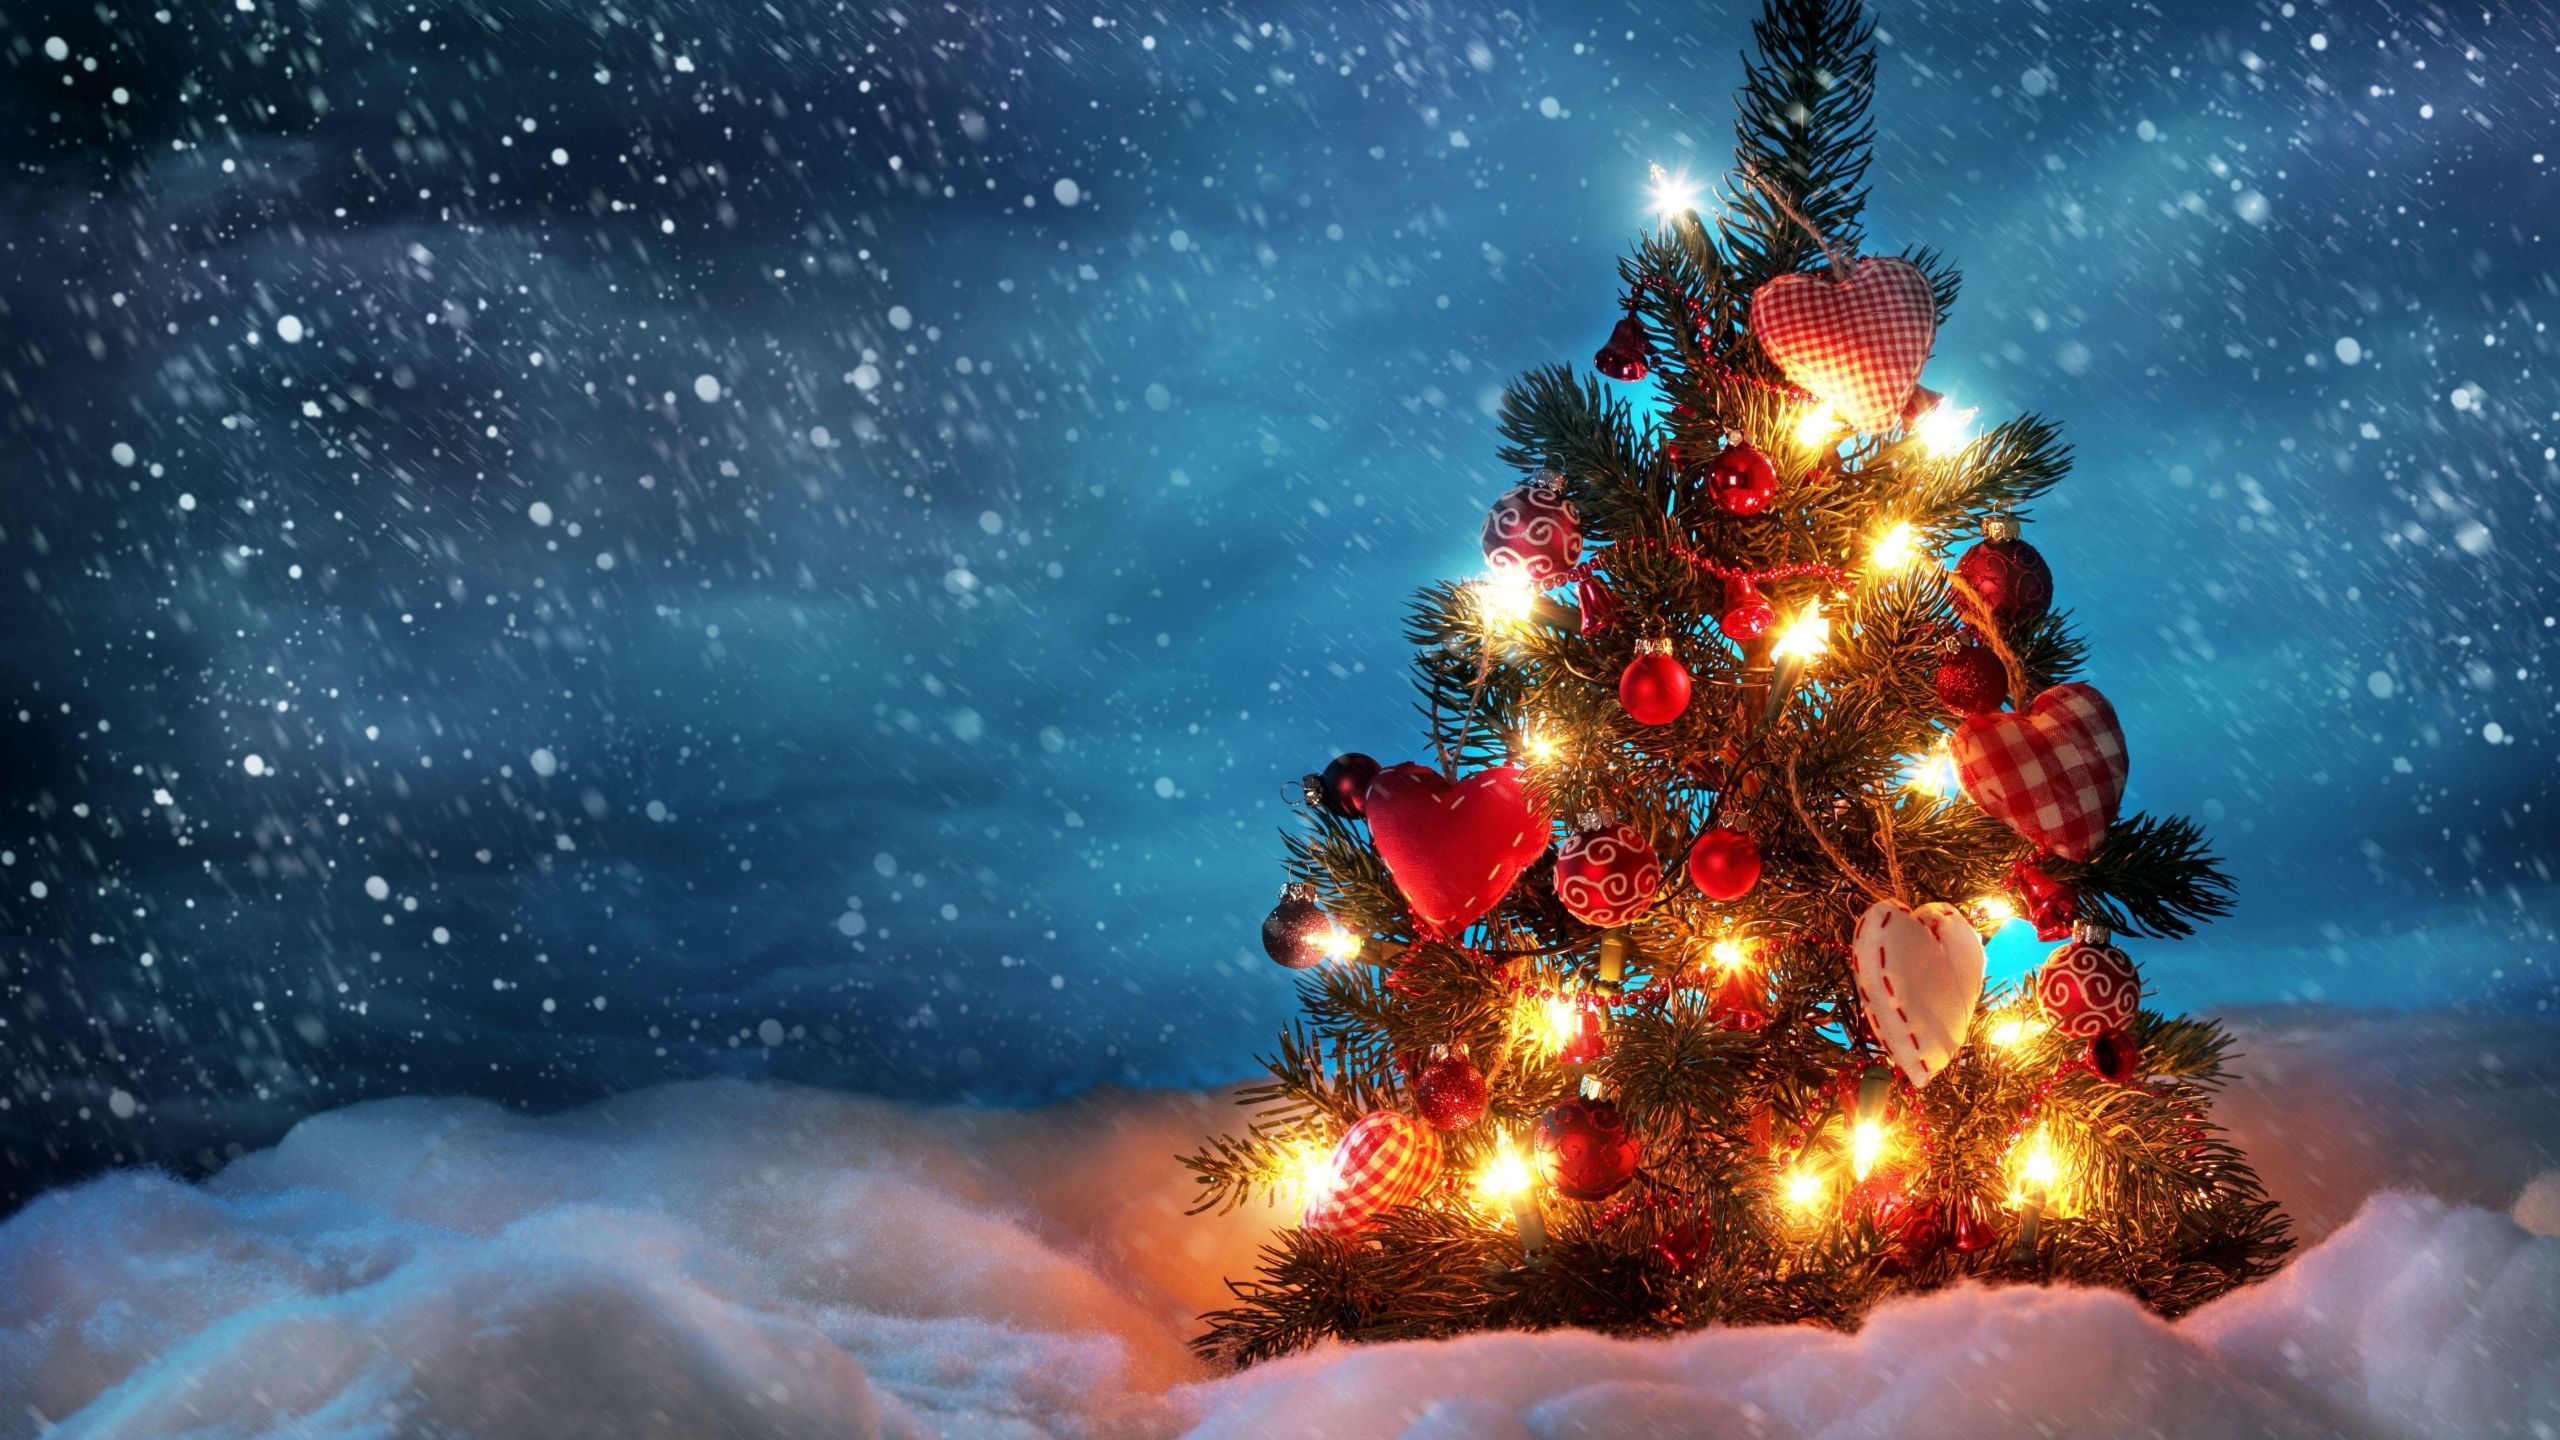 Christmas Night 2560x1440 Wallpapers - Wallpaper Cave